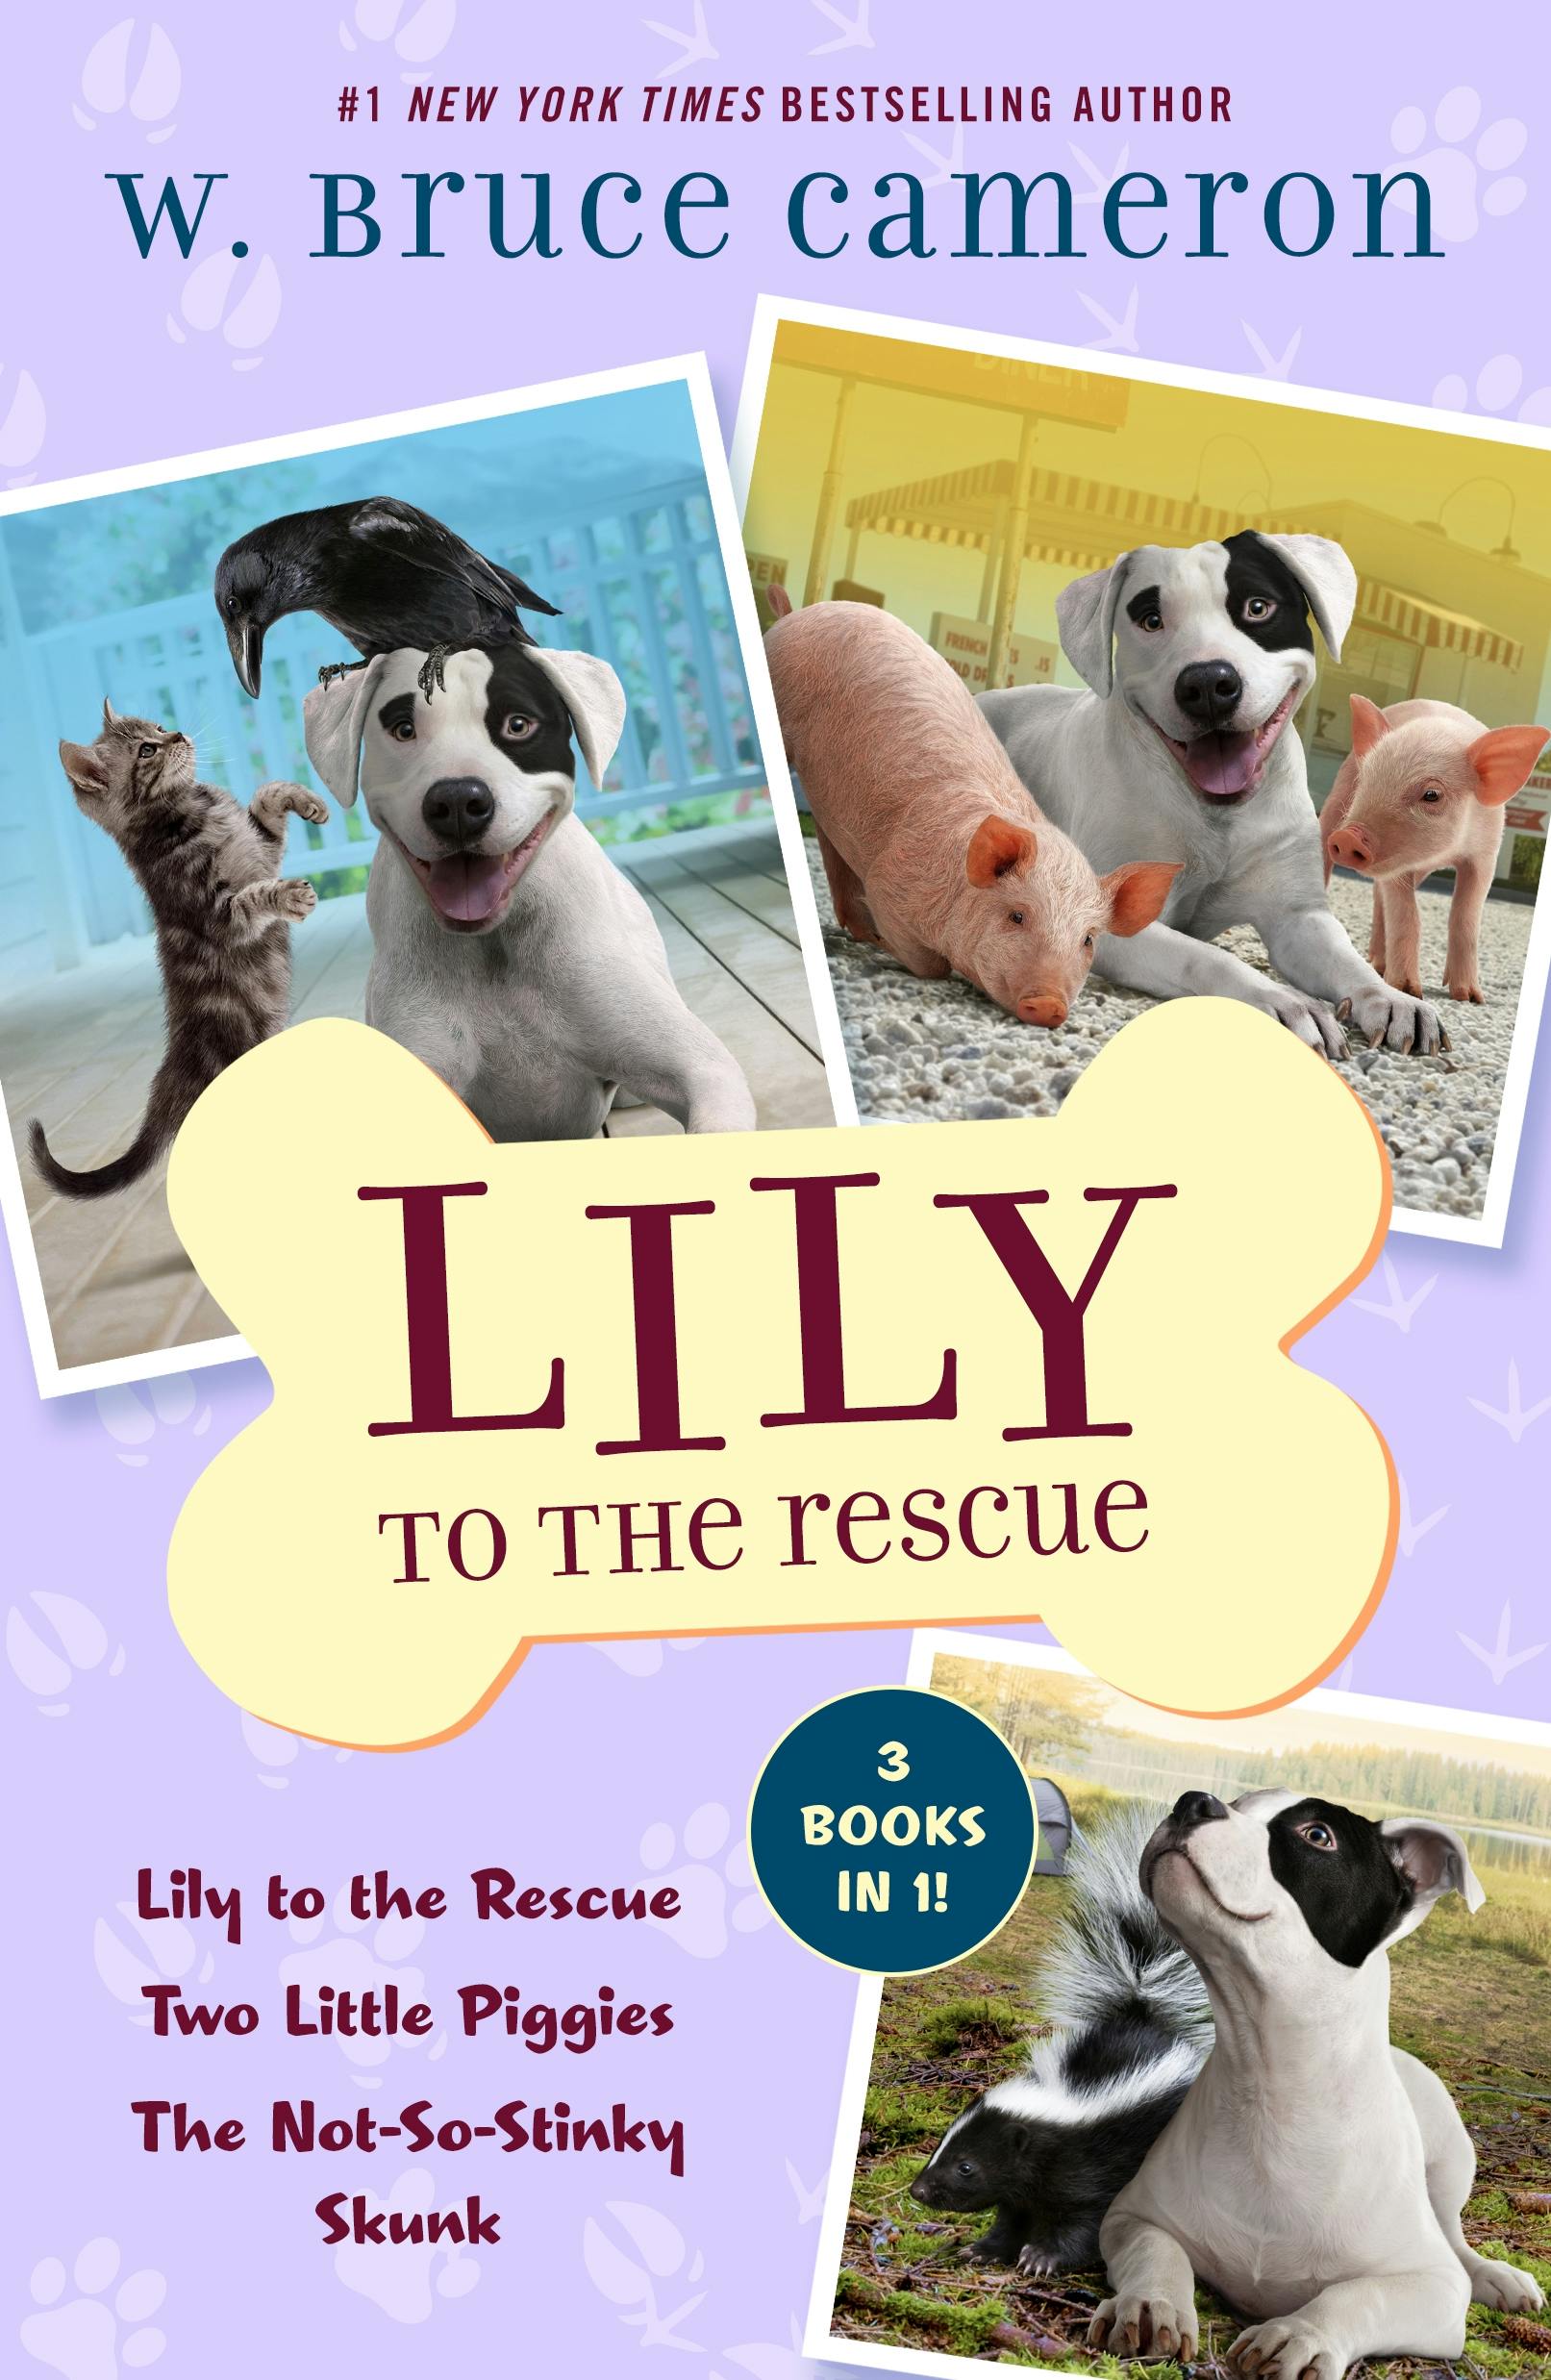 Cover for the book titled as: Lily to the Rescue Bind-Up Books 1-3